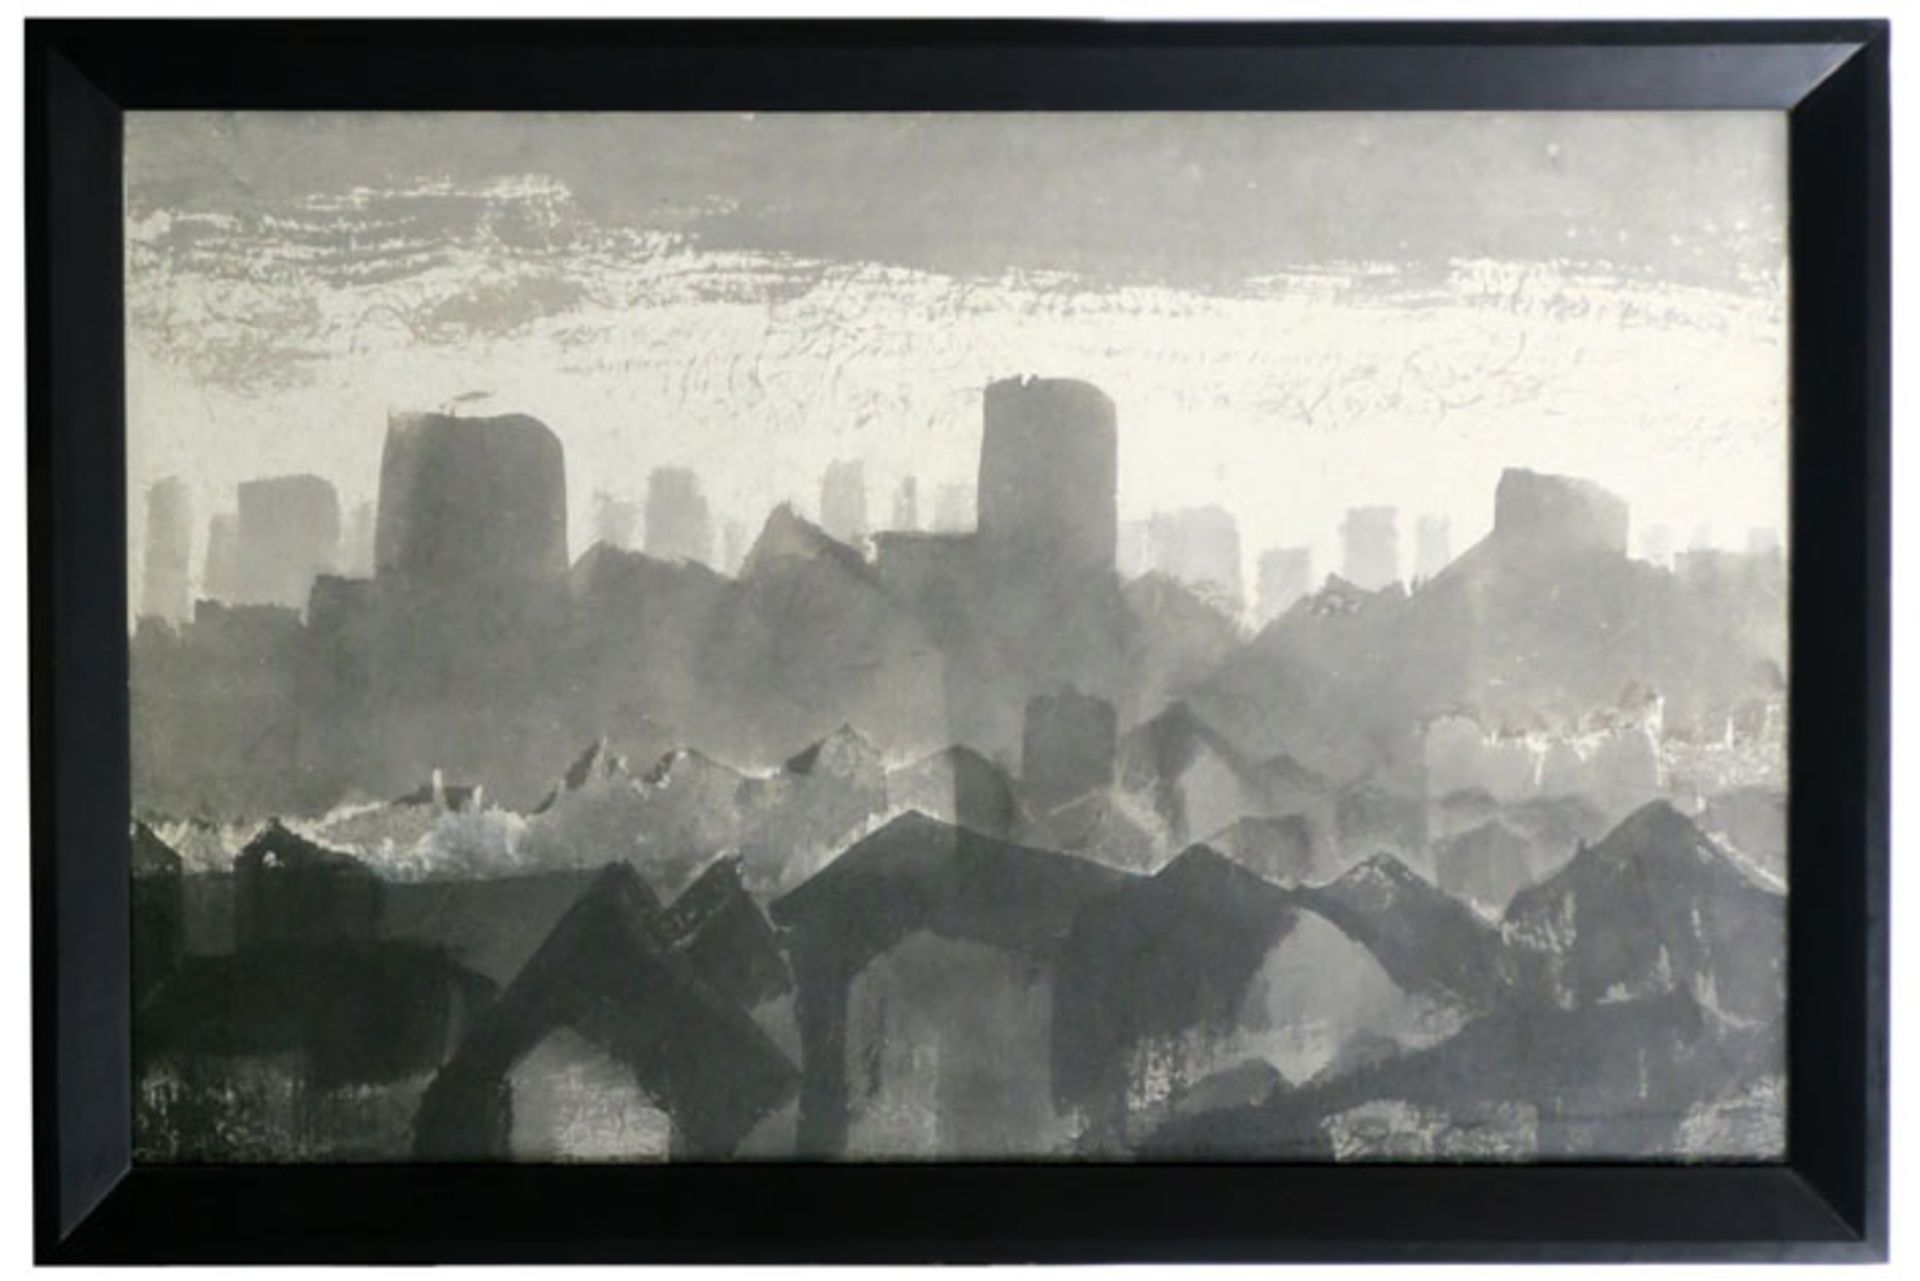 21st Cent. Chinese mixed media painting - titled "Metropole", signed Xinjiang Gao and [...]